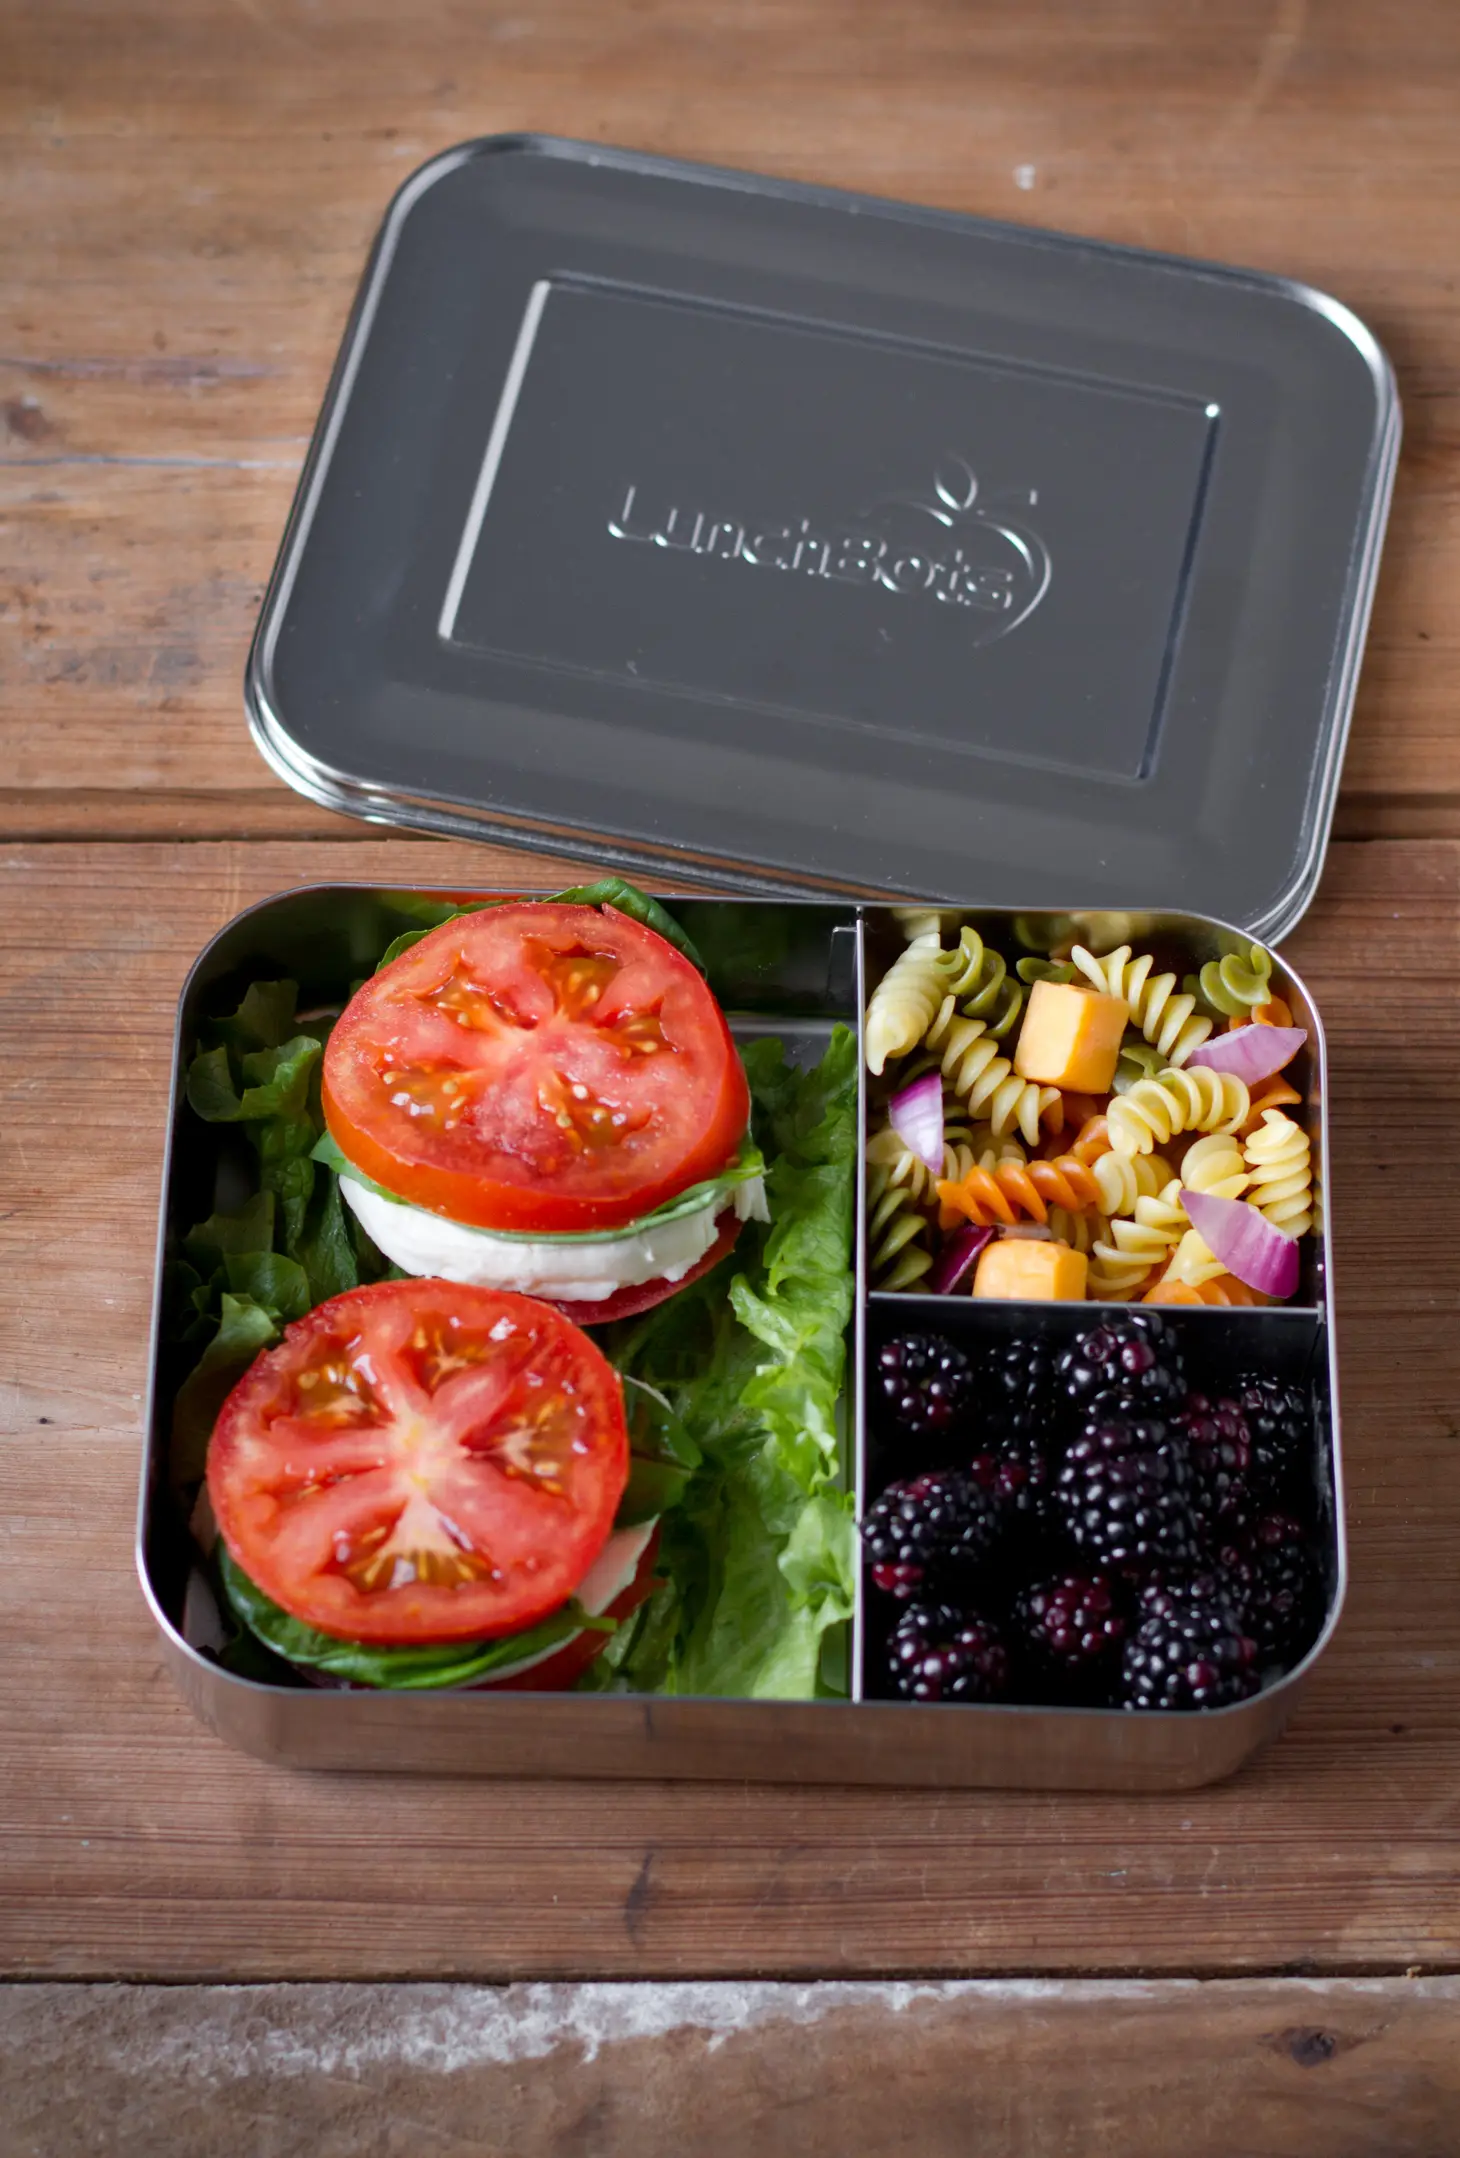 https://gimmethegoodstuff.org/wp-content/uploads/LunchBots-Large-3-Compartment-Stainless-Steel-Bento-Lunchbox-on-a-wooden-table-filled-with-blackberries-pasta-salad-and-tomatoe-sandiwches..webp